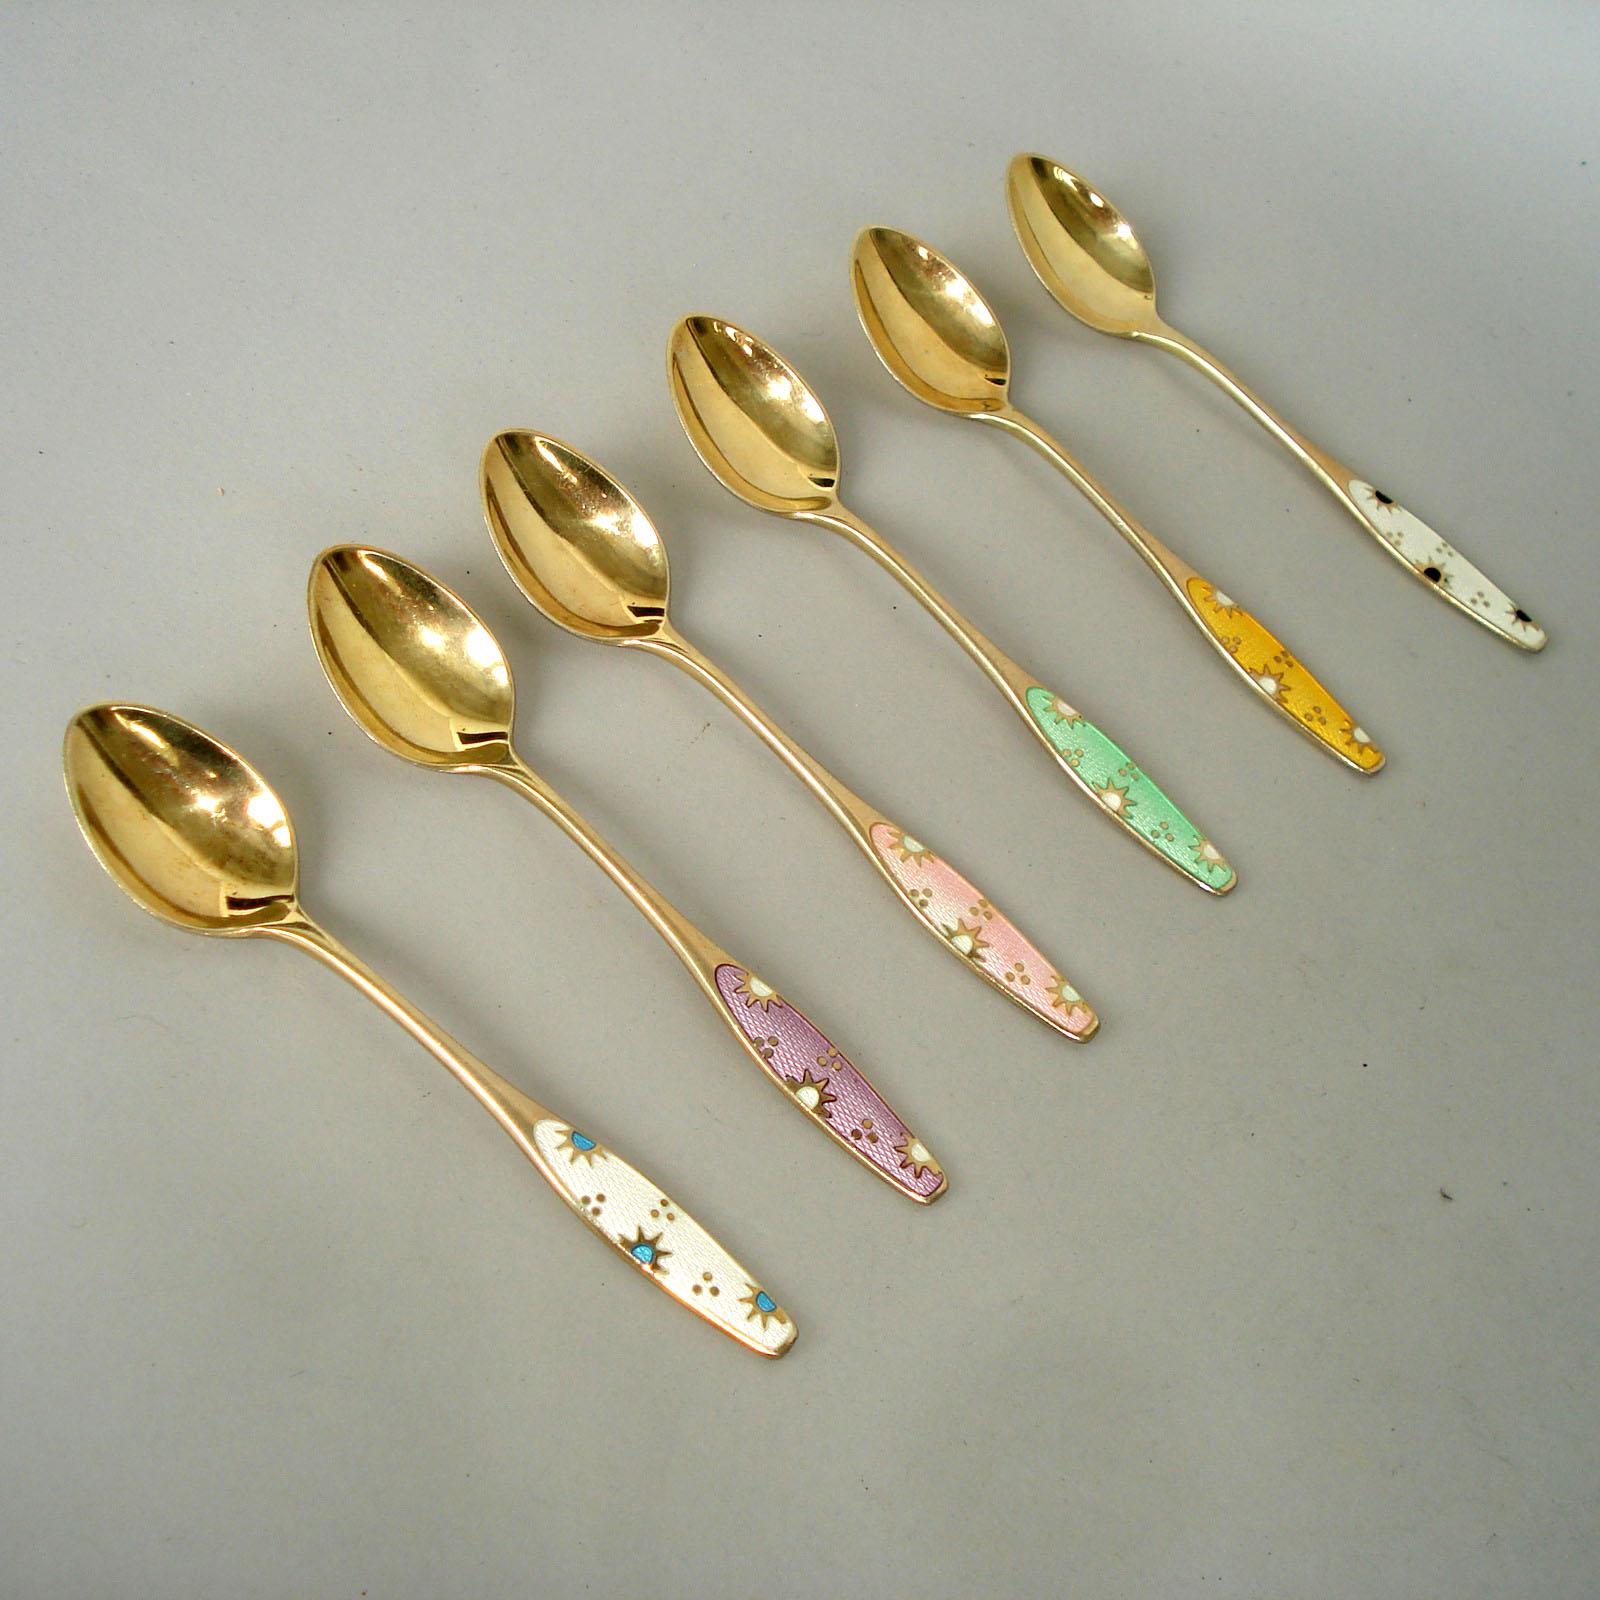 Mid-20th Century Danish Spoons, Gilt Sterling Silver, Polychrome Enamel, Set of Six, circa 1930 For Sale